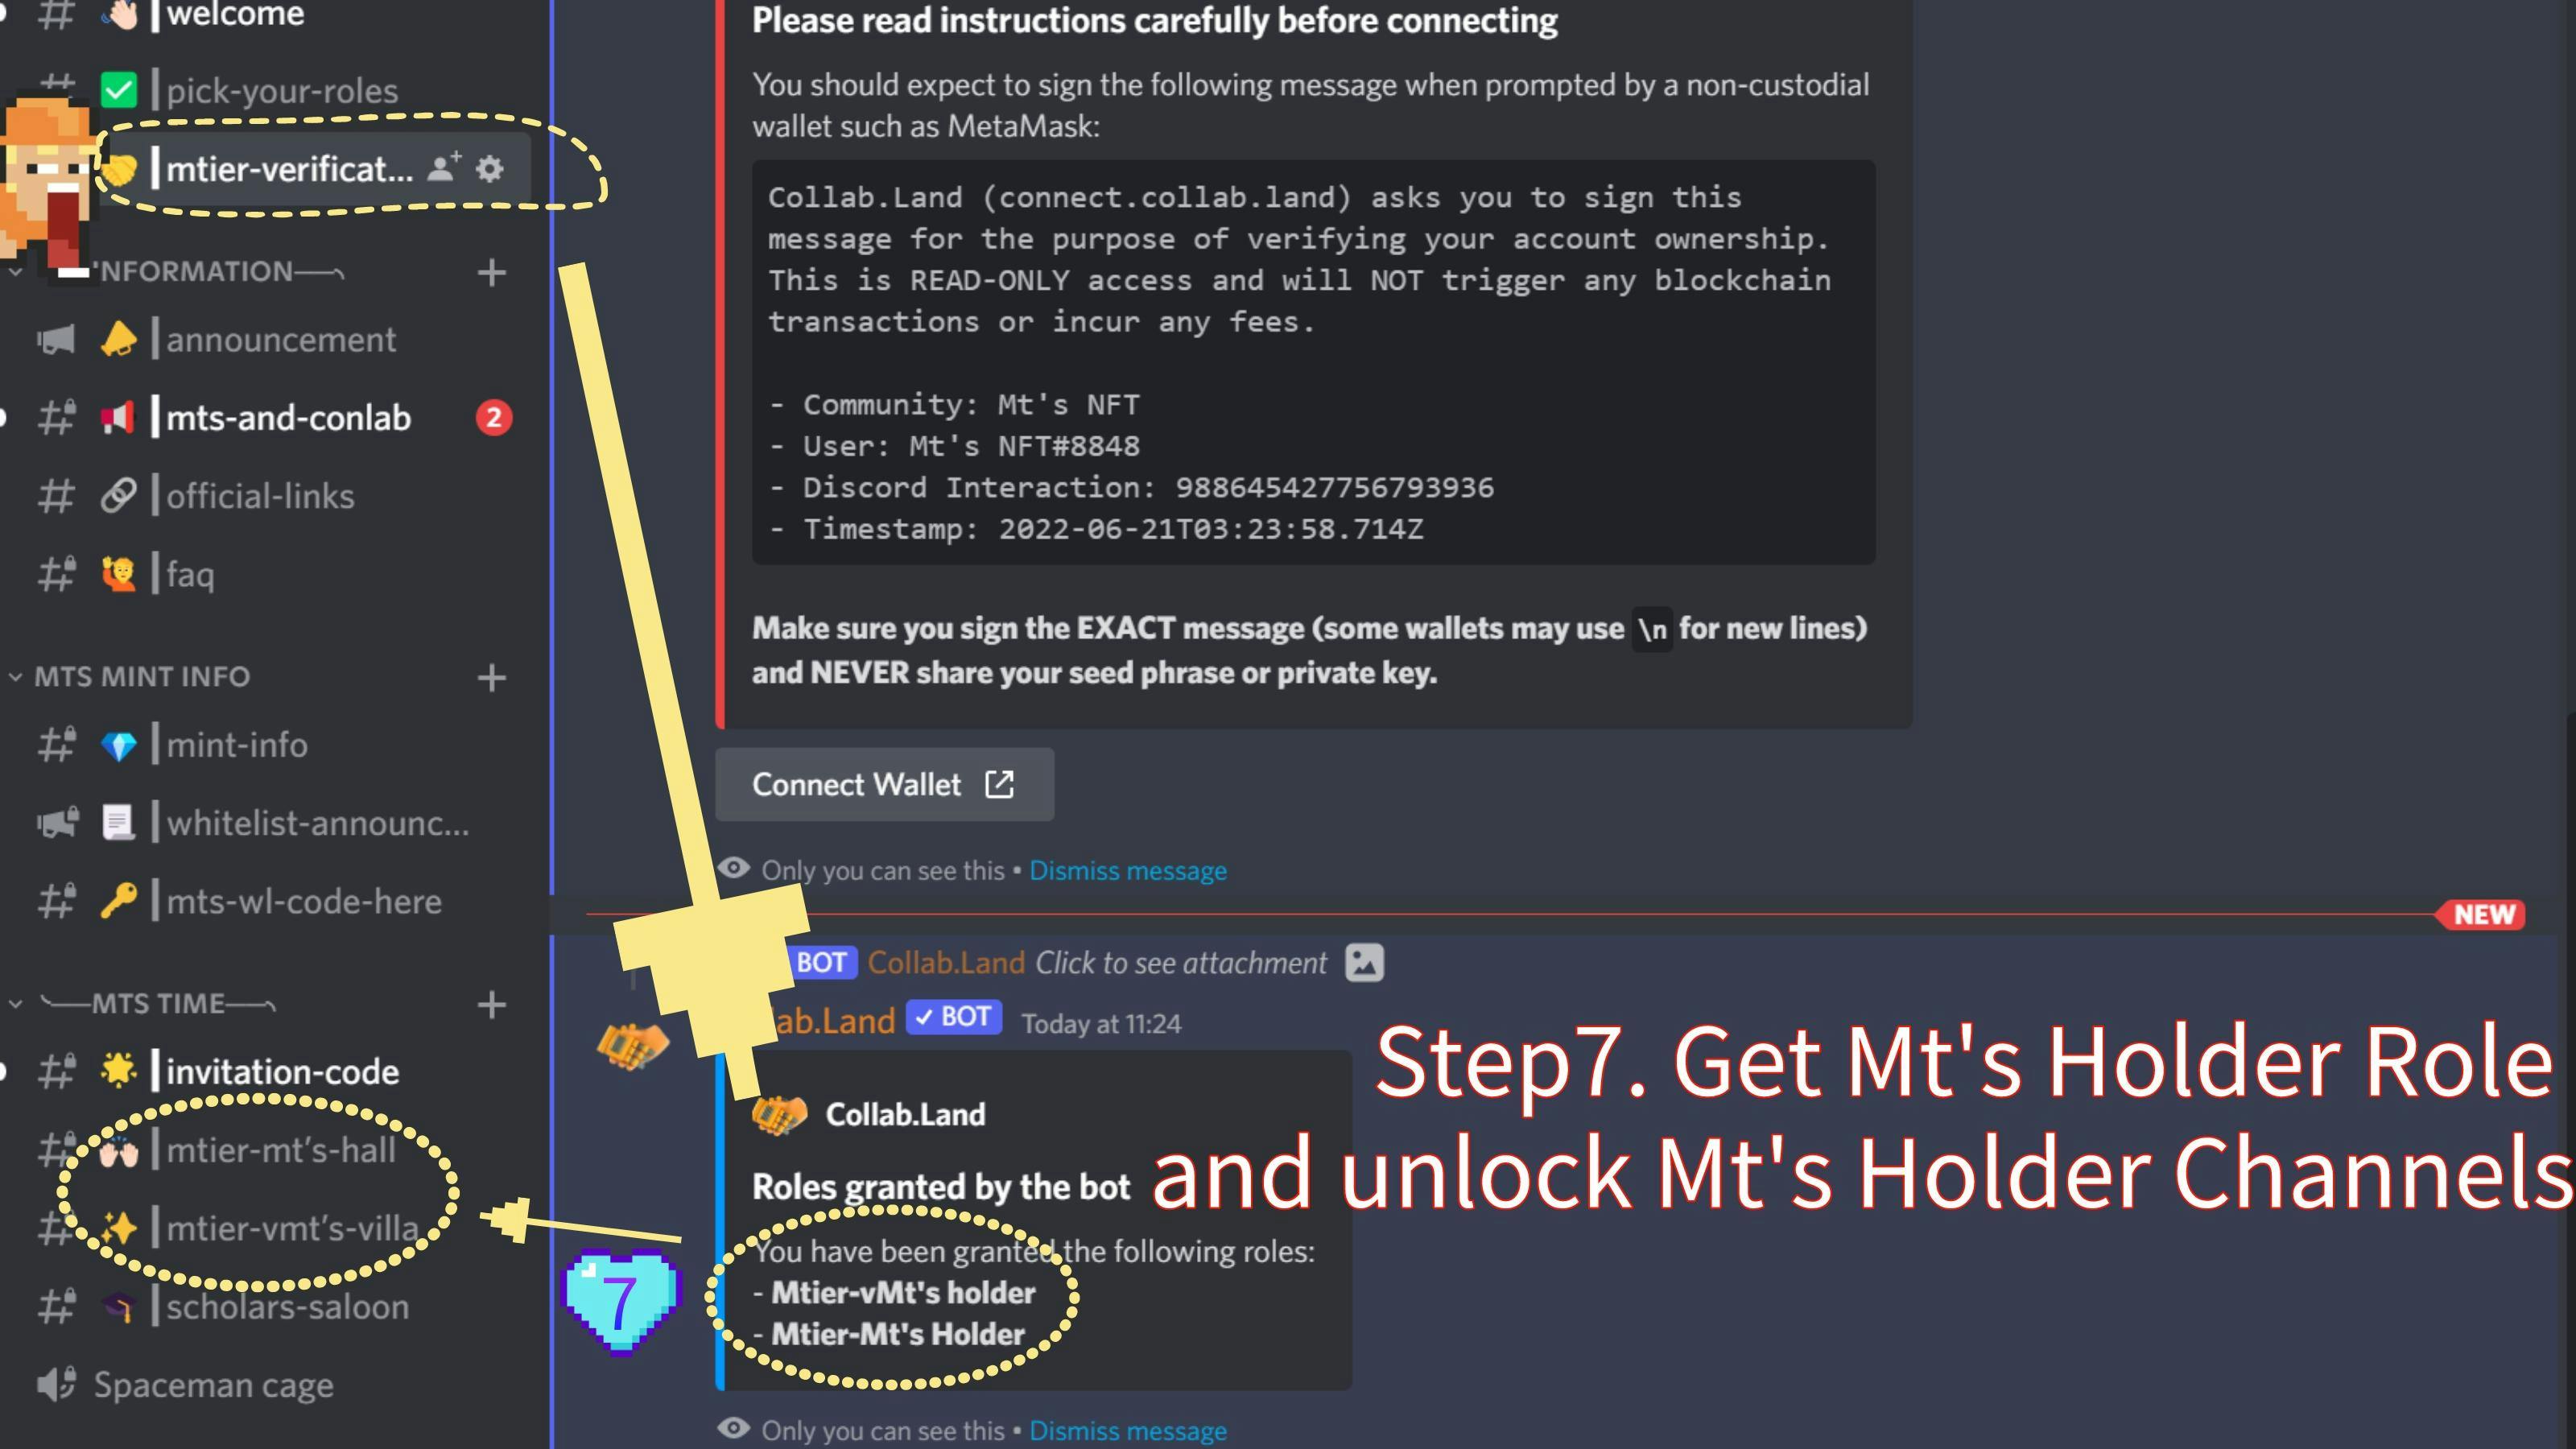 Get Mt’s Role and unlock the holder channel